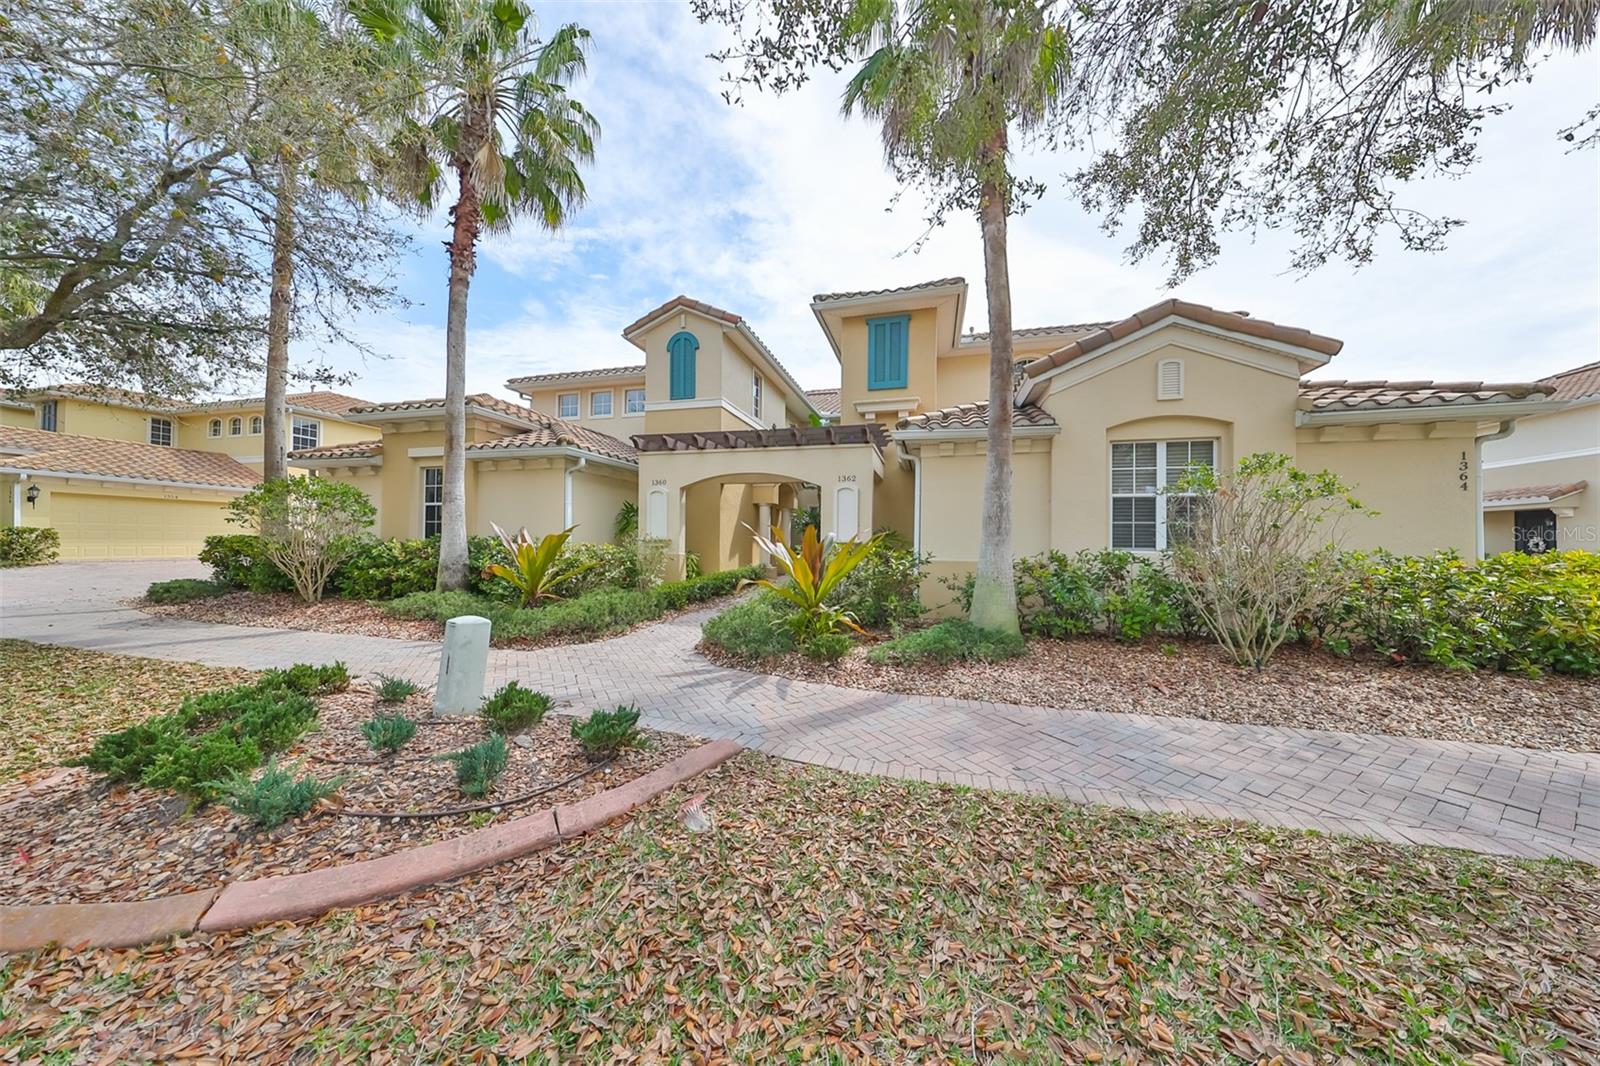 Pride of home ownership is everywhere in this community. With custom pavered sidewalks and driveways, lighted streetlamps, beautiful oaks and tall swaying palm trees, this is considered one of the prettiest streets in all of Sun City Center.